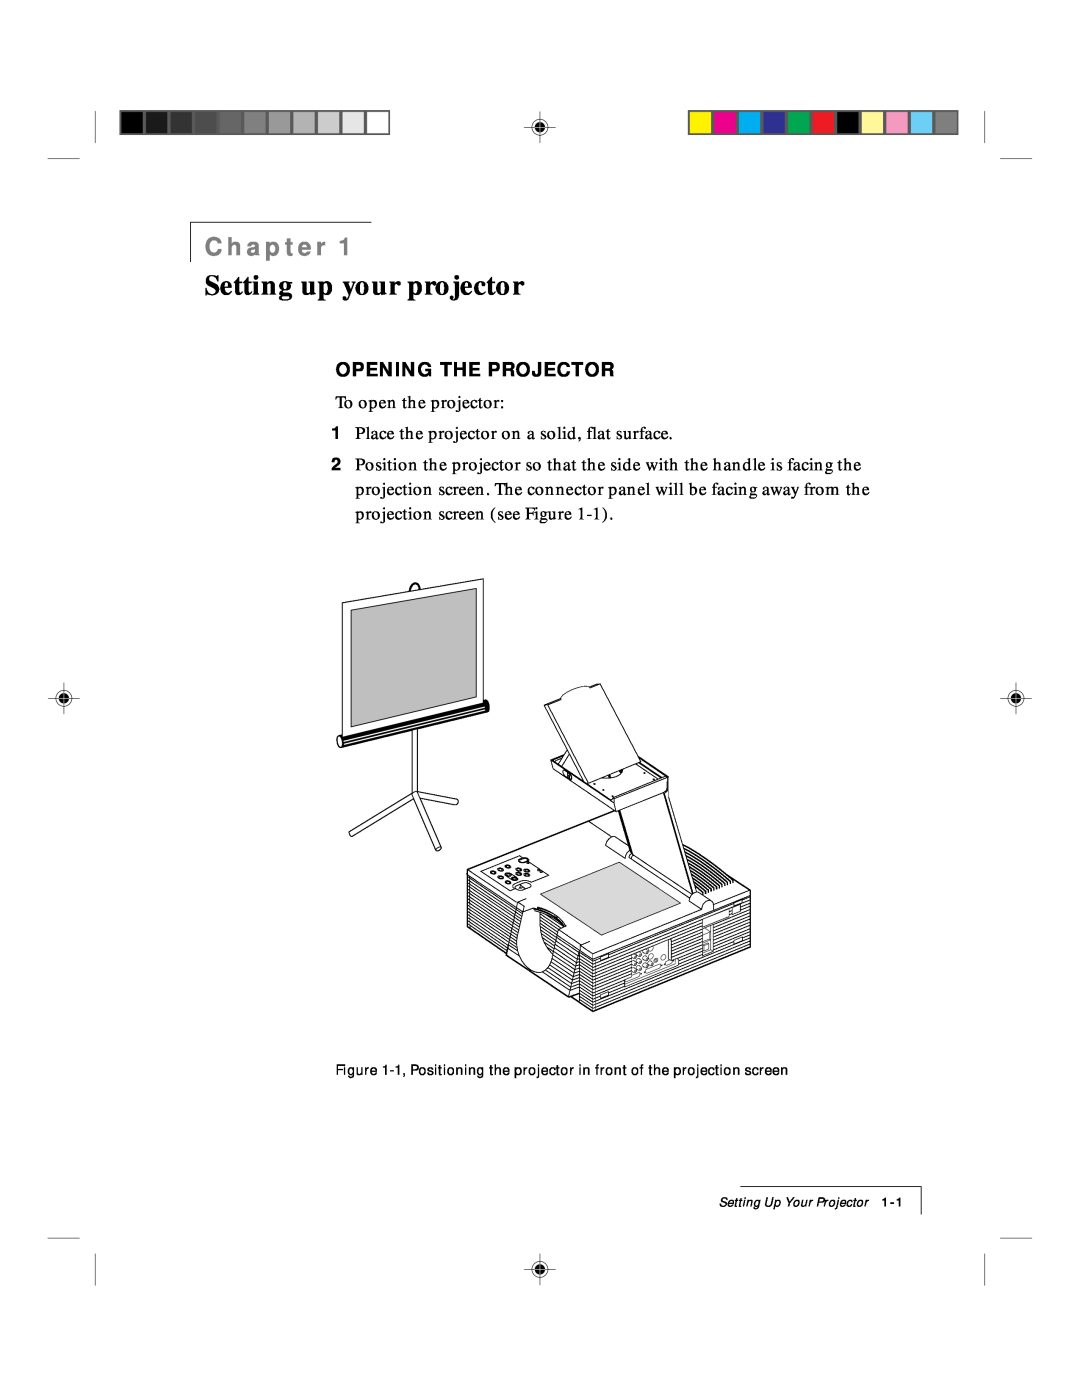 Ask Proxima 9100 manual Setting up your projector, Chapter, Opening The Projector, Setting Up Your Projector 